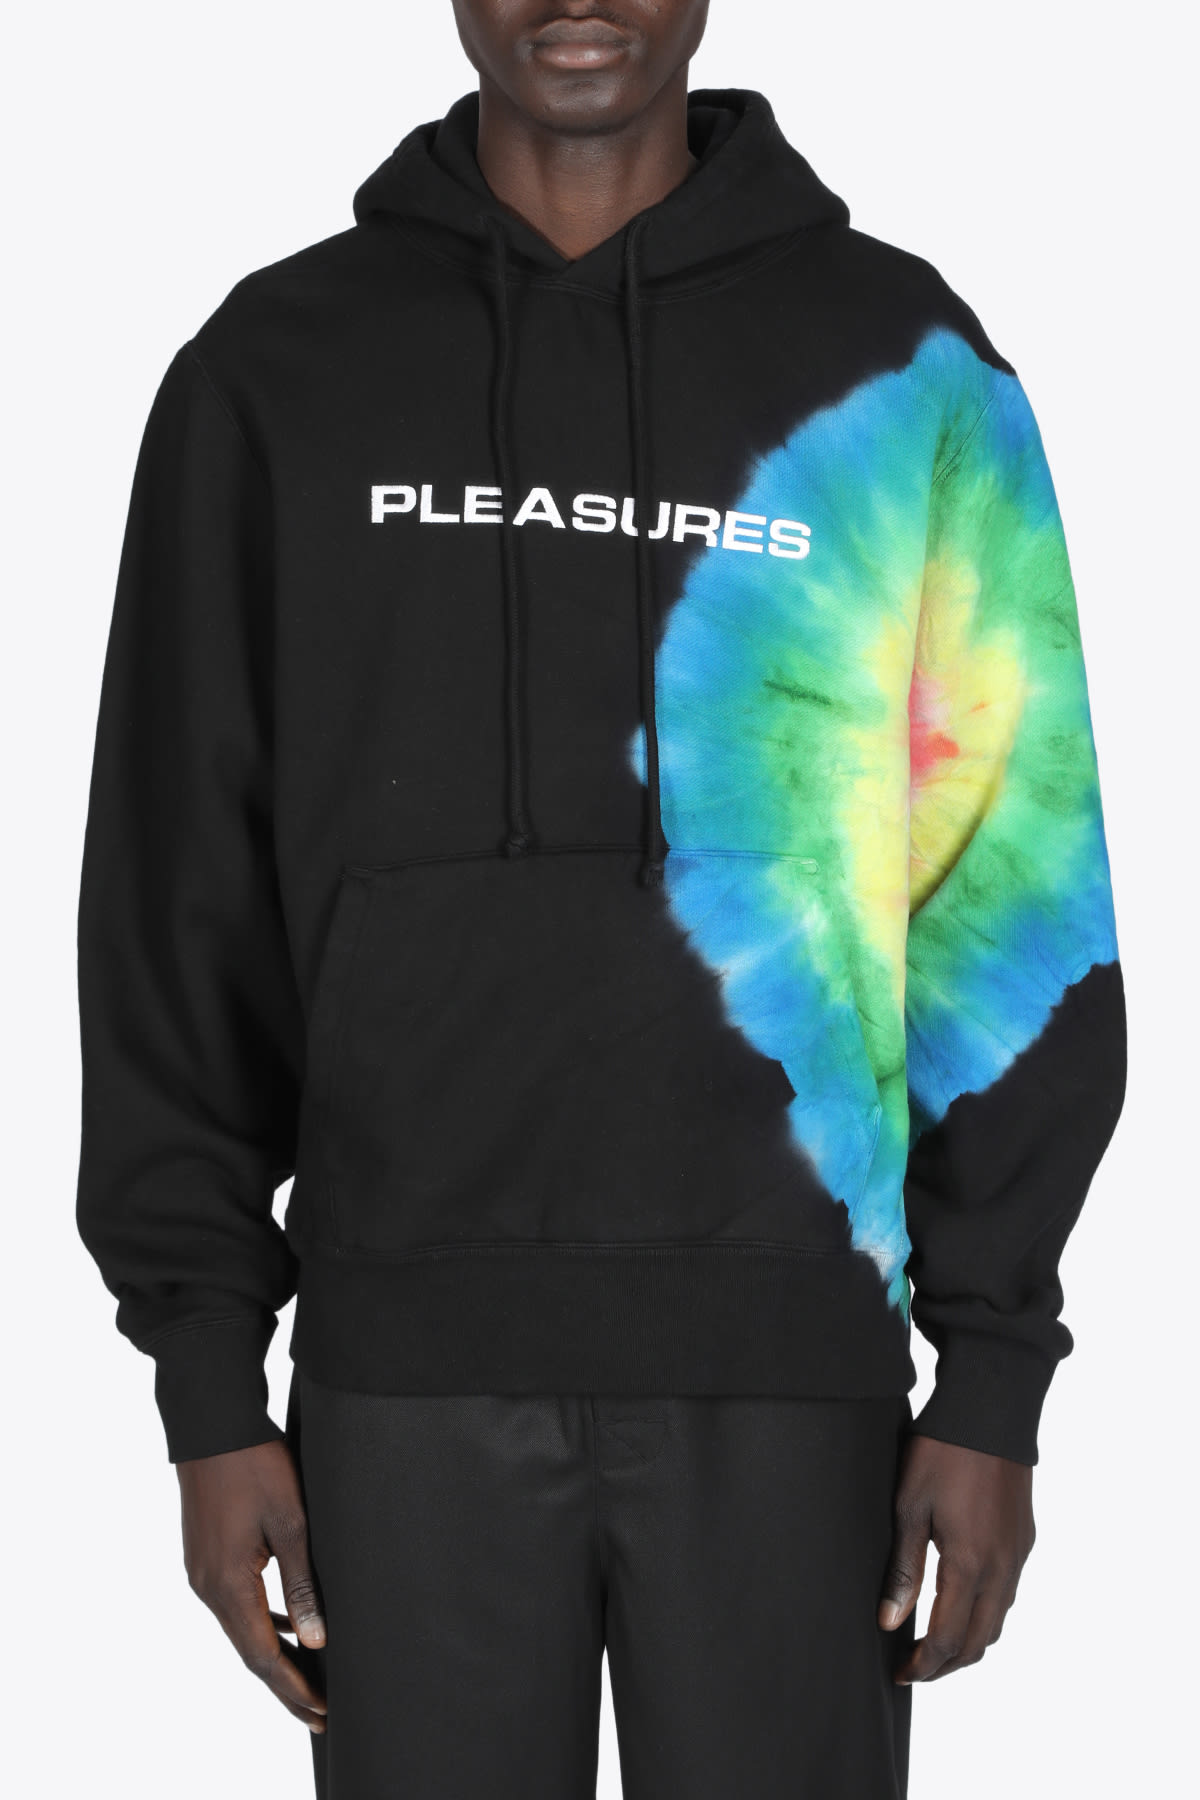 Pleasures Eclipse Embroidered Hoody